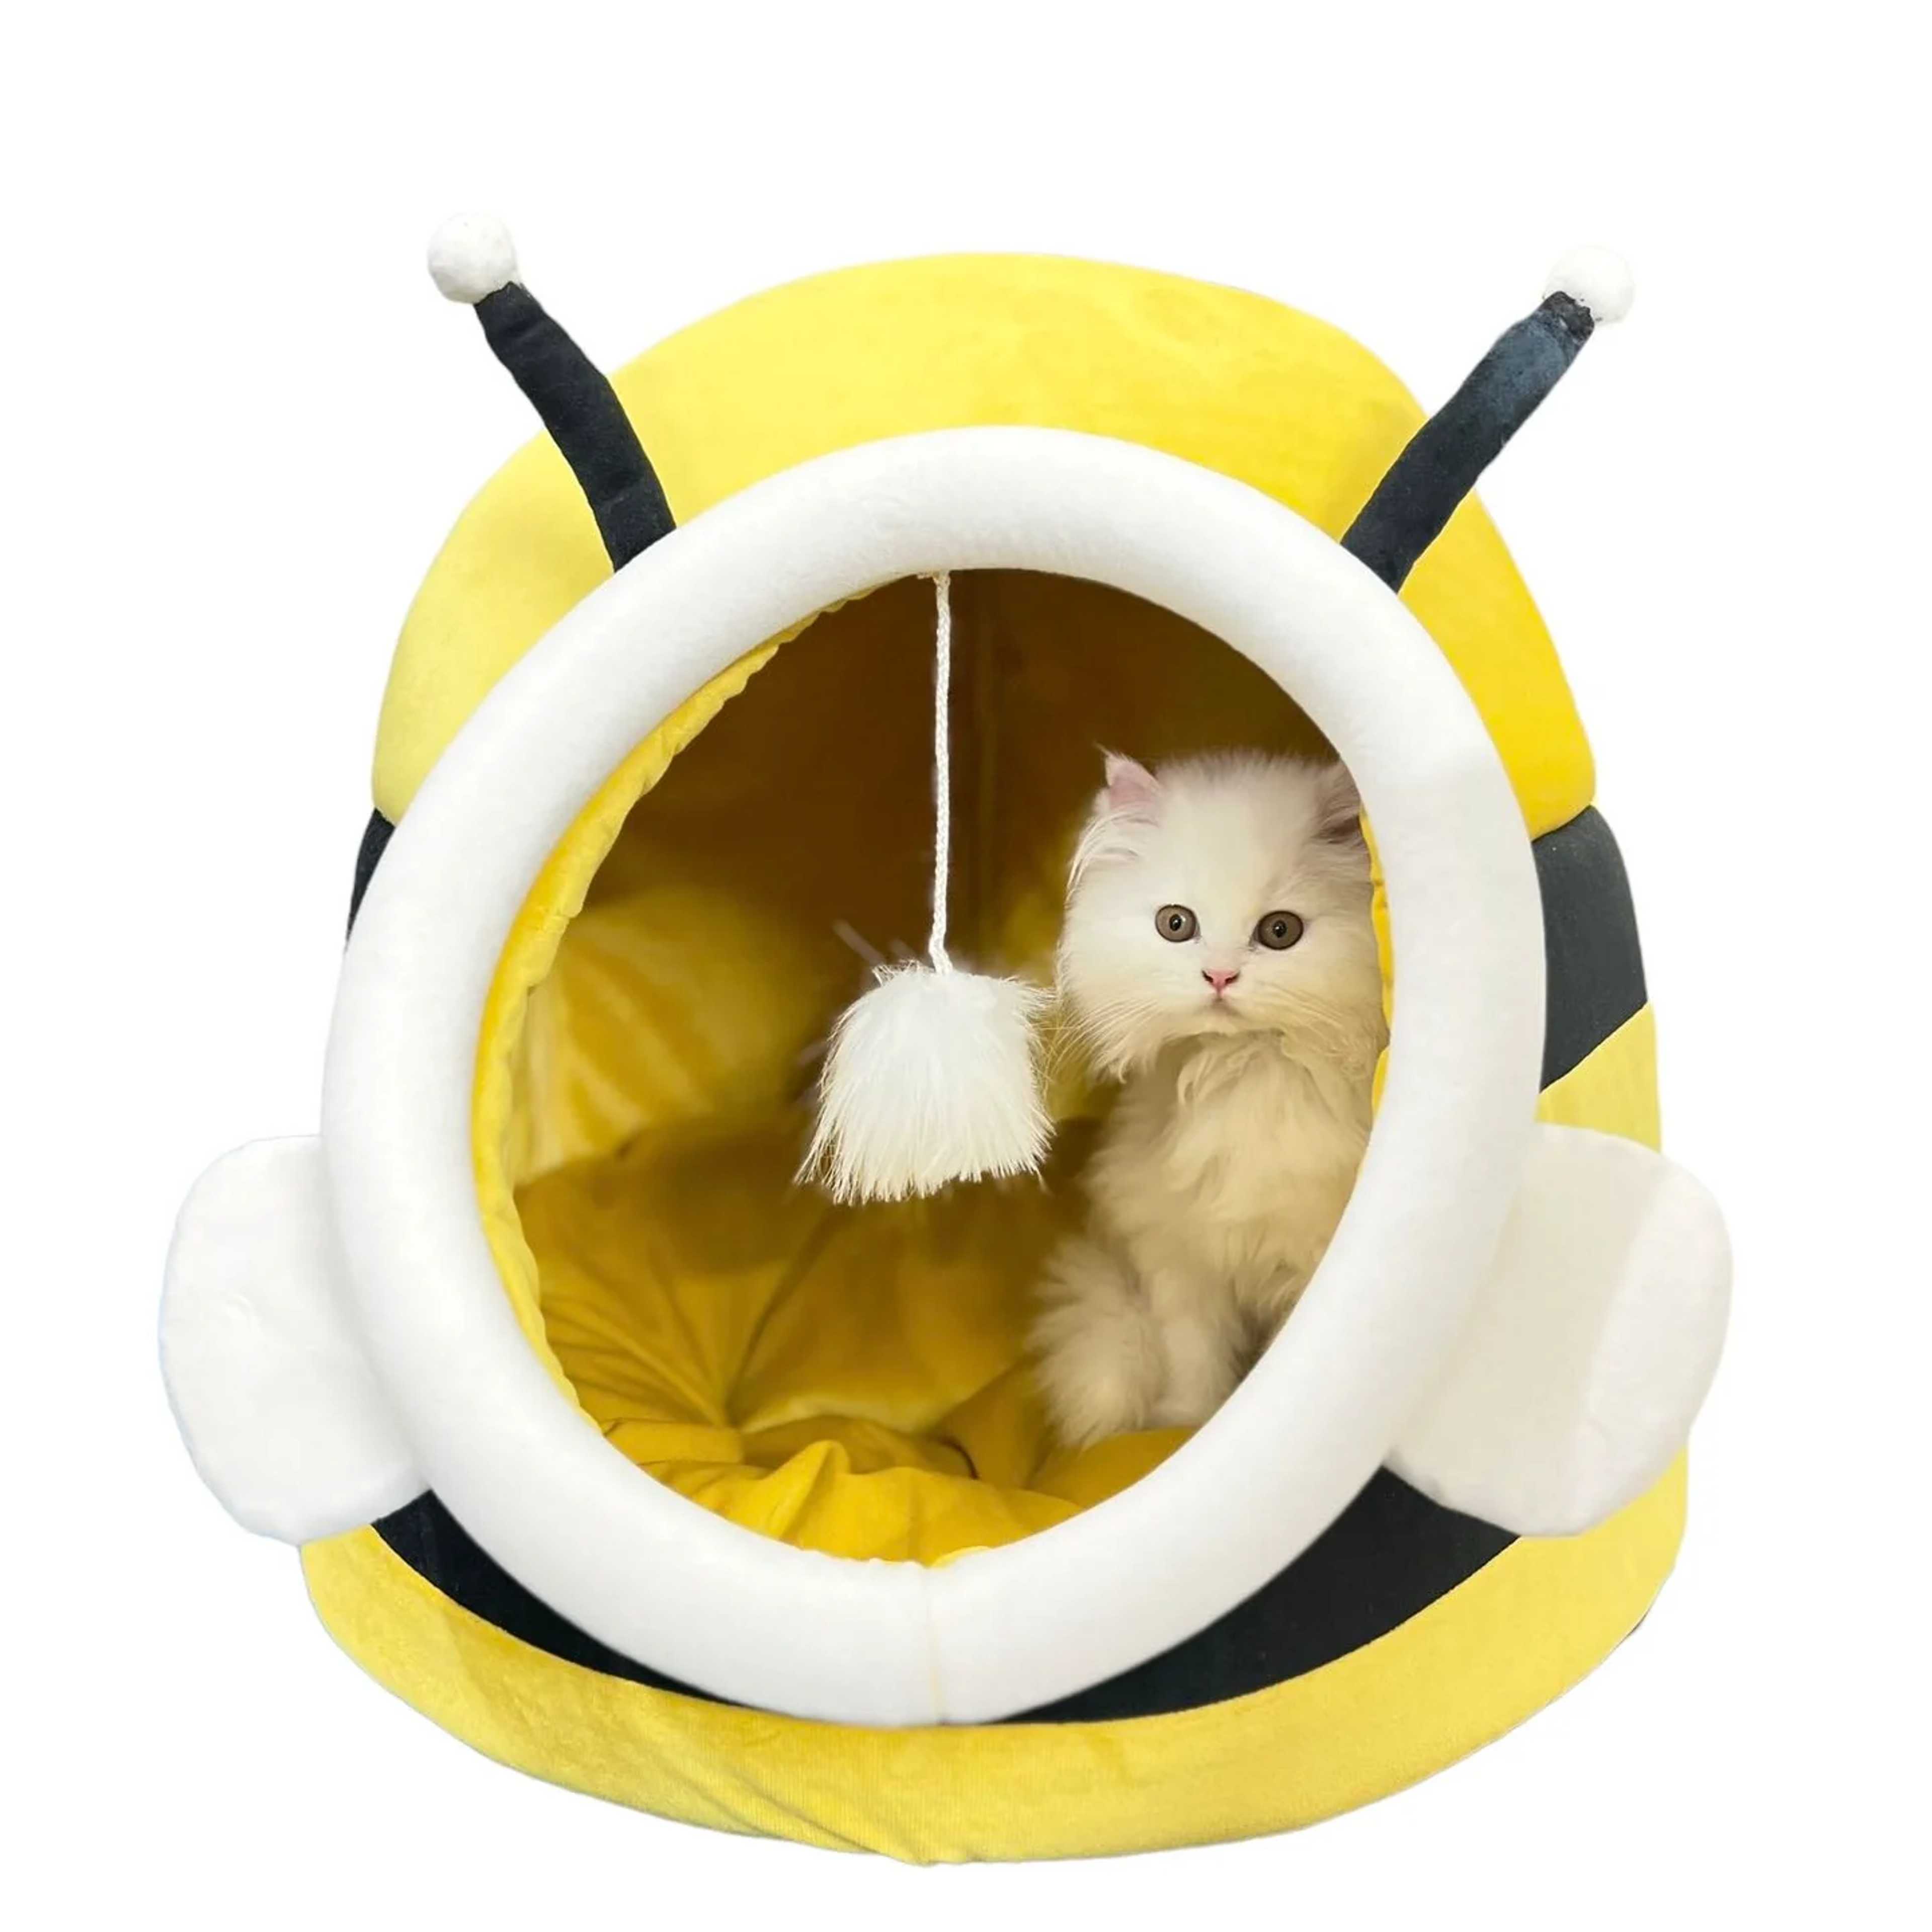 Bumble bee pet house -ROUND